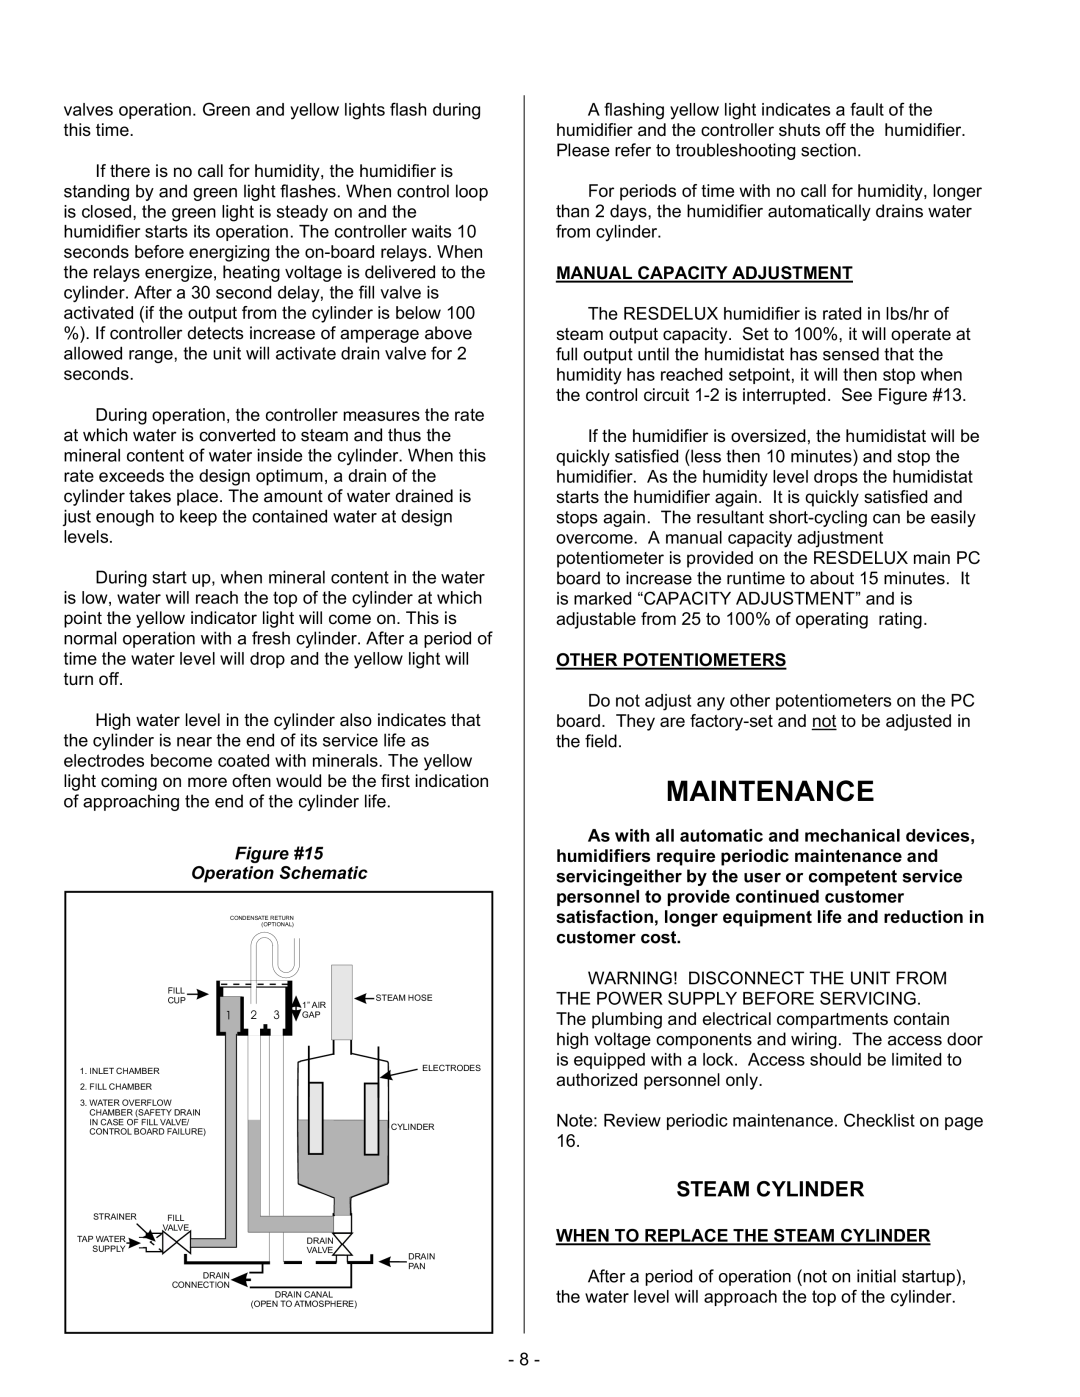 Nortec Steam Humidifiers manual Maintenance, Steam Cylinder, Figure #15 Operation Schematic, Manual Capacity Adjustment 